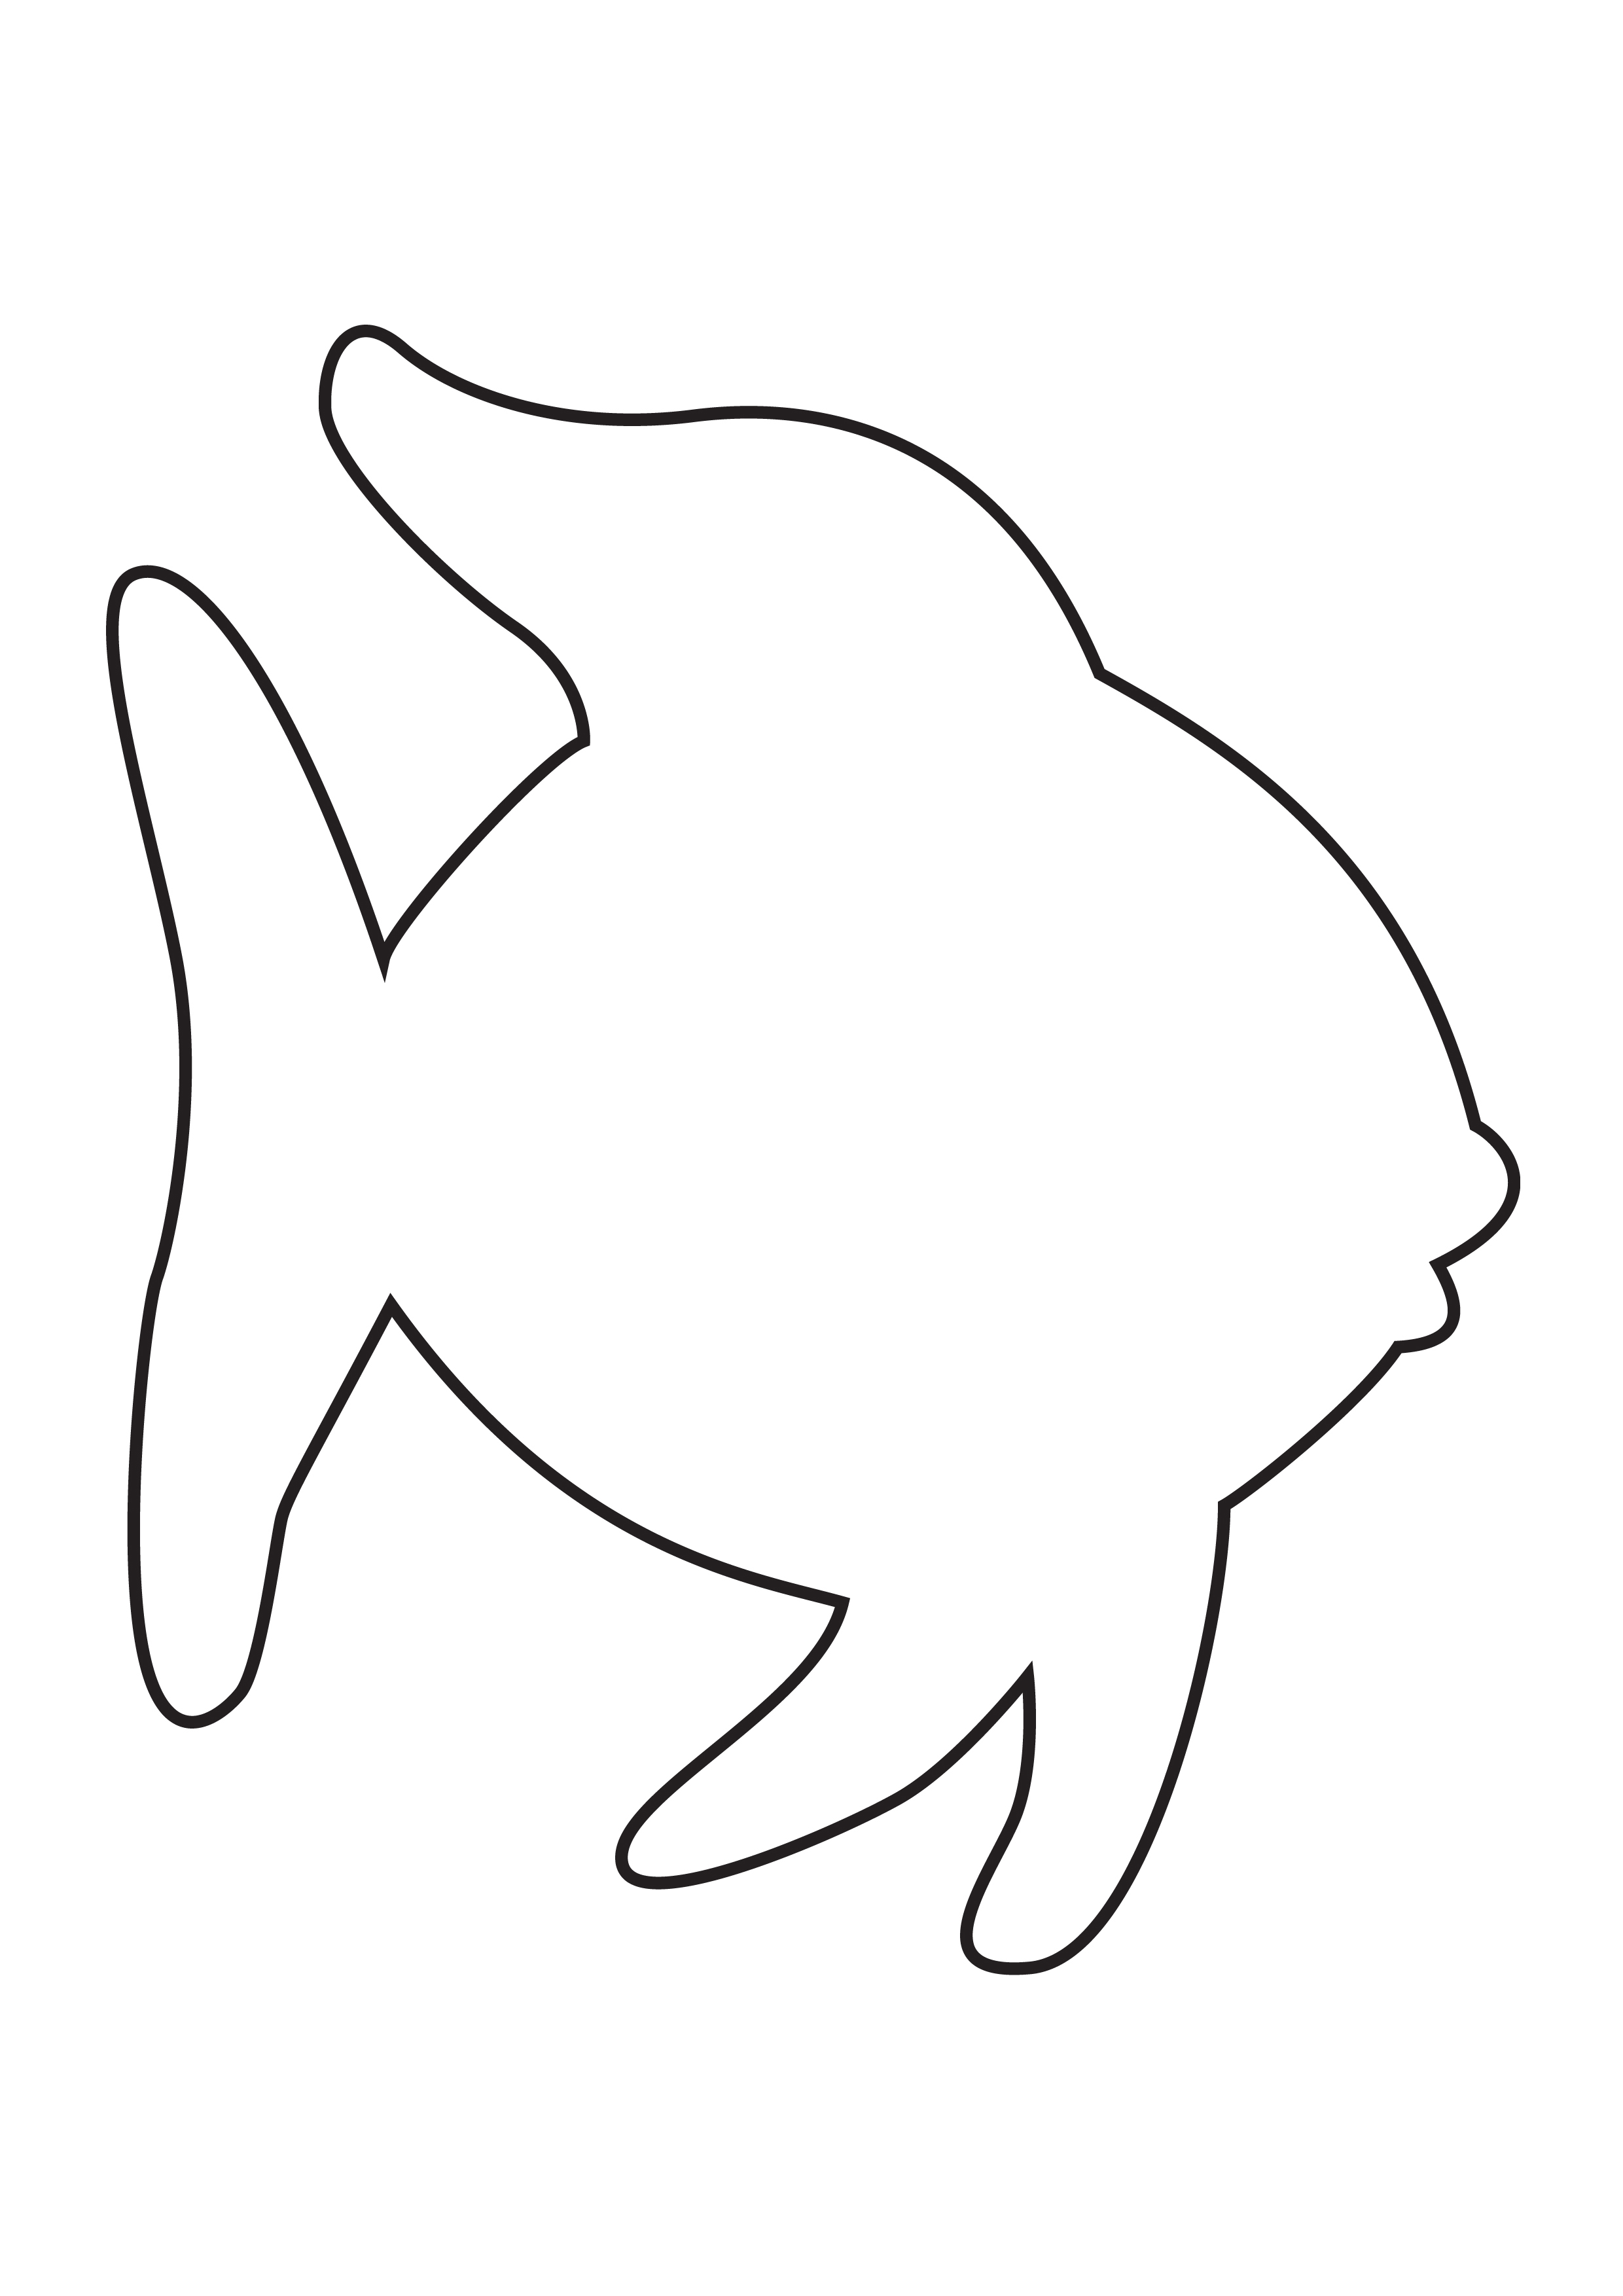 Free Fish Template, Download Free Clip Art, Free Clip Art on